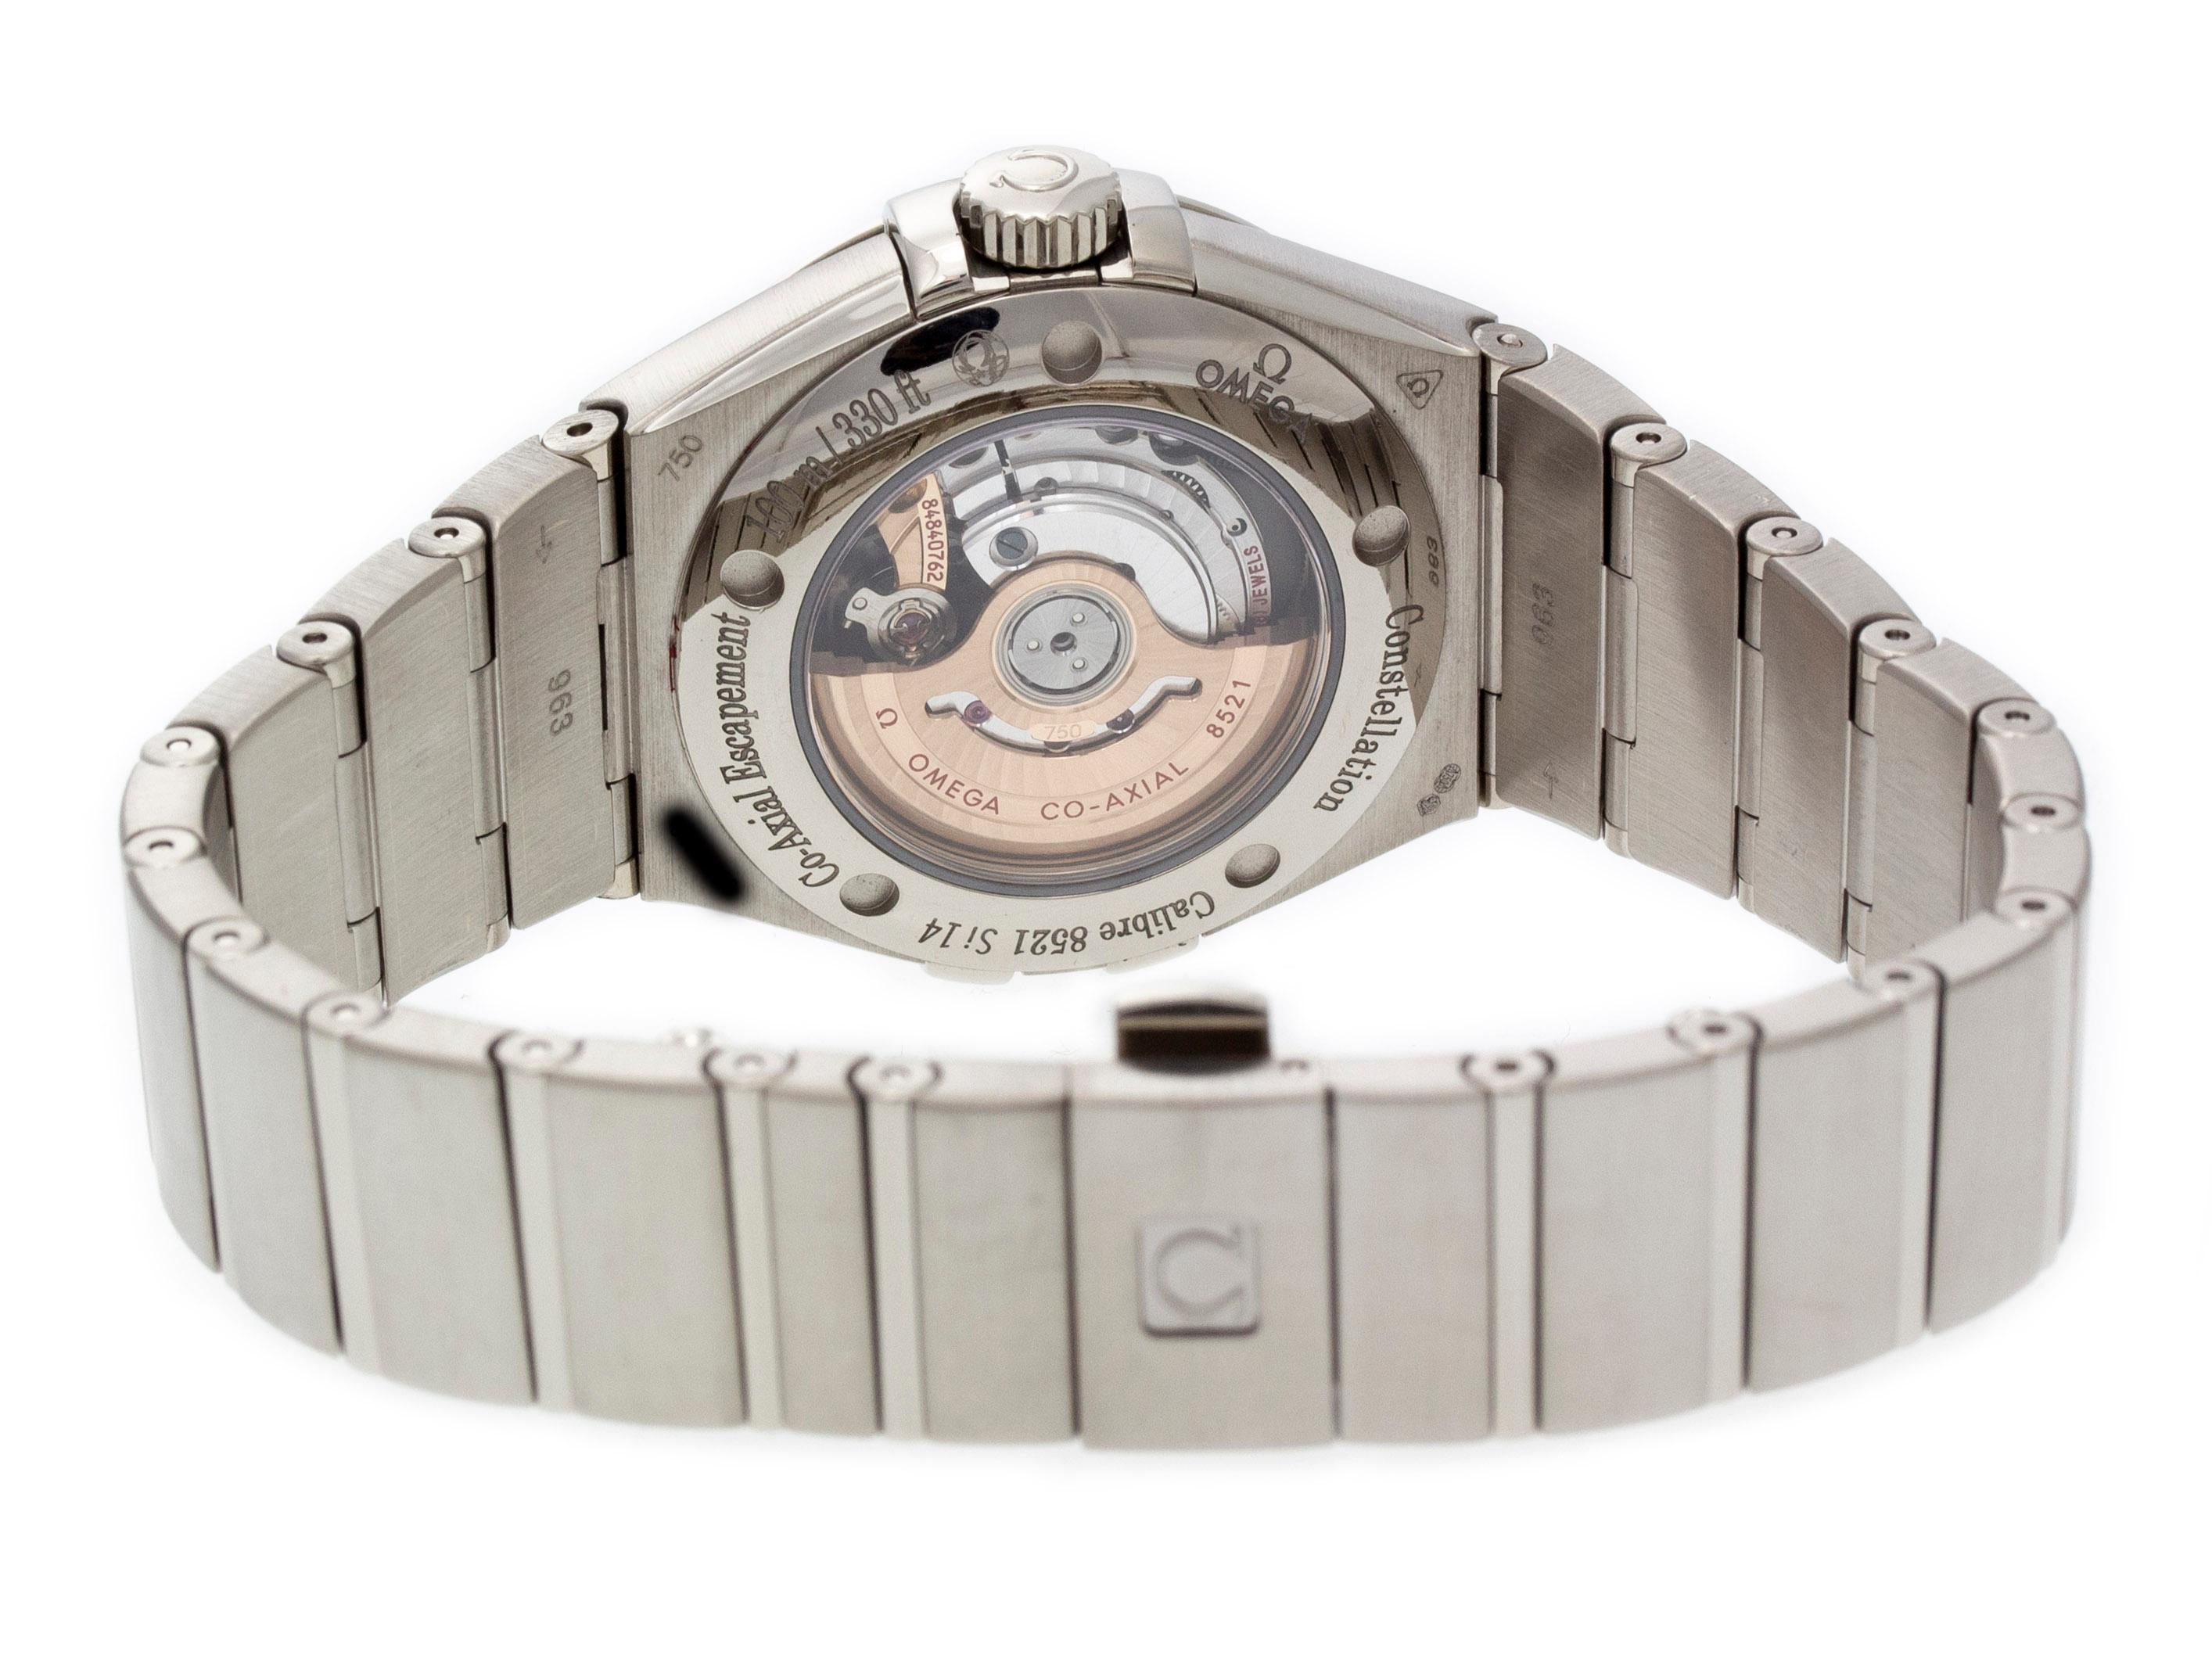 Omega Constellation 123.55.31.20.51.001 For Sale 6